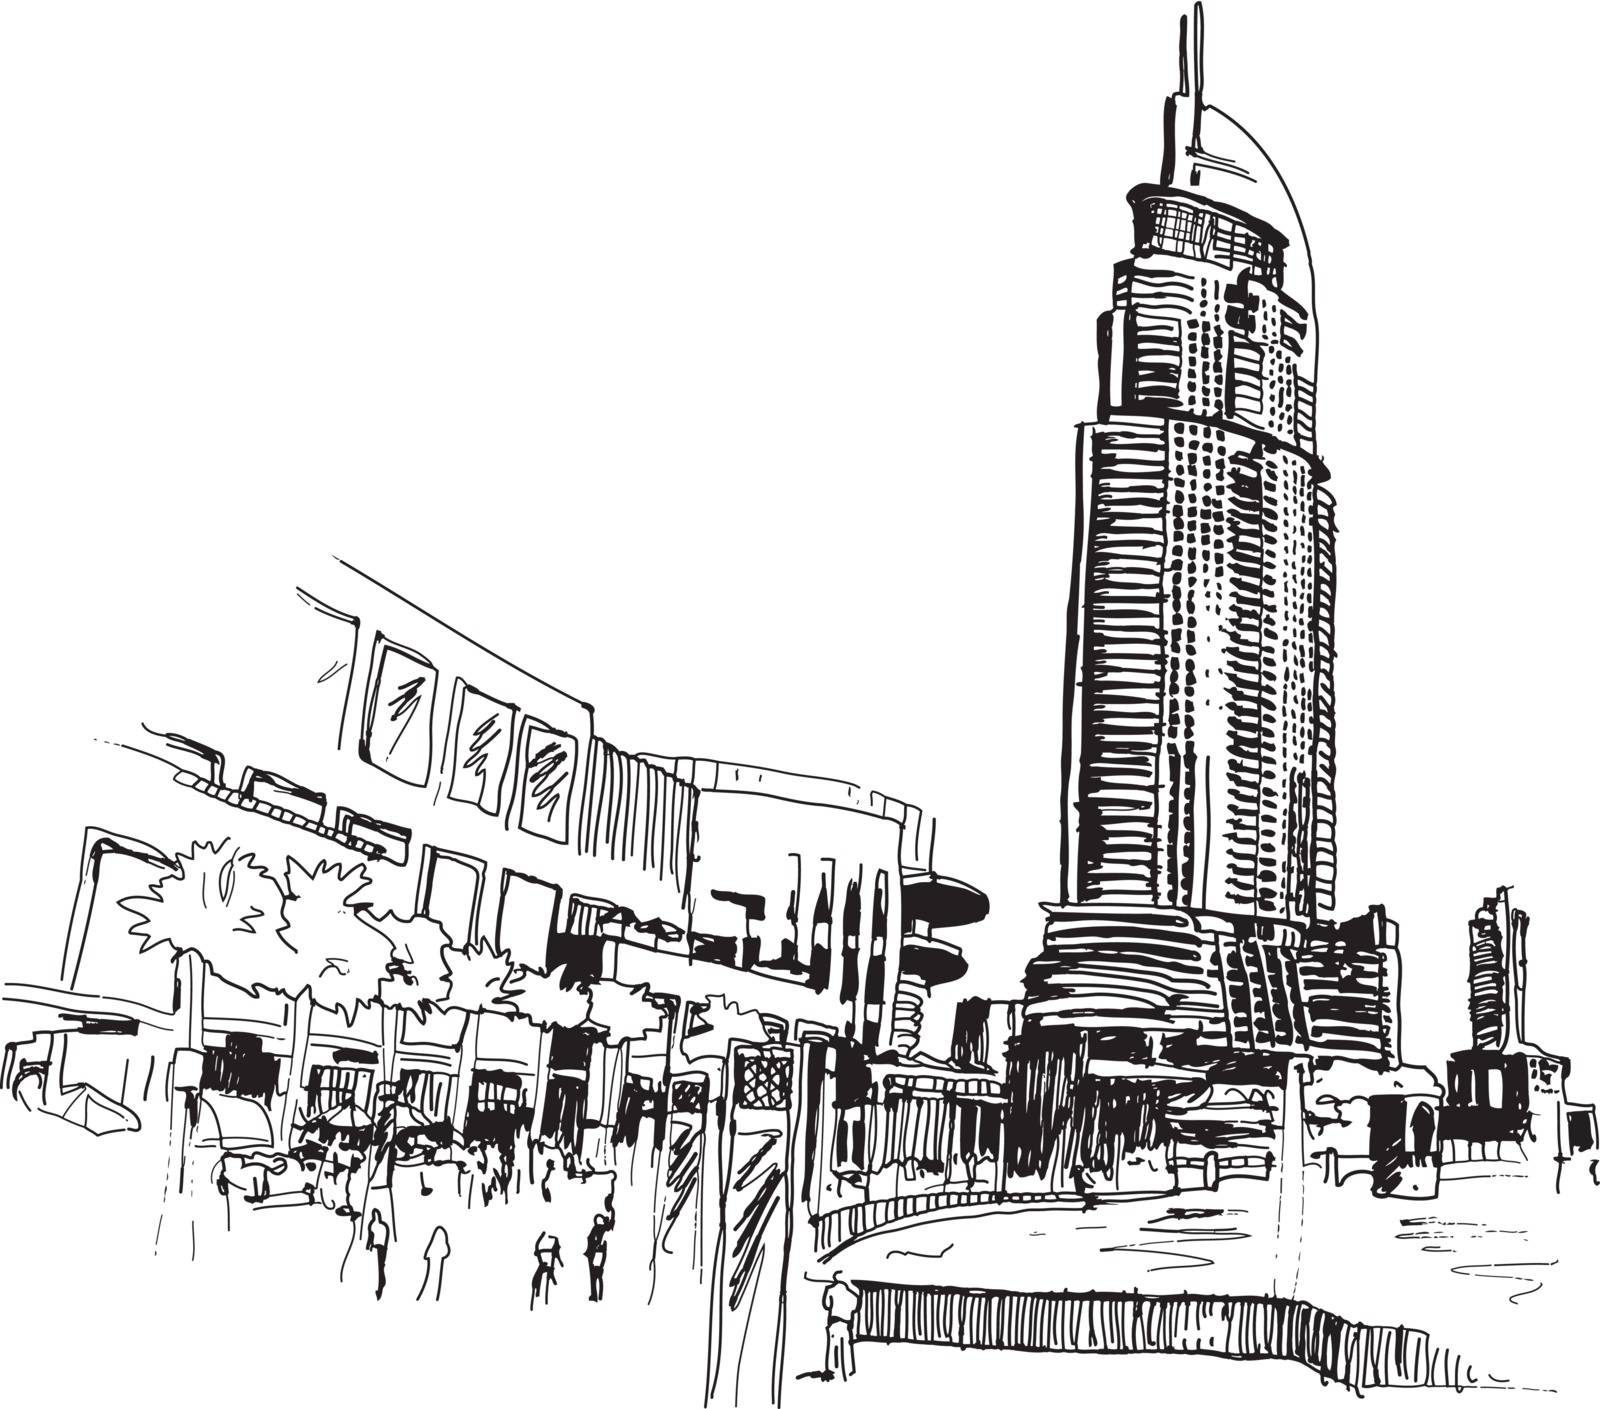 Urban view sketcy drawing vector illustration with modern buildings